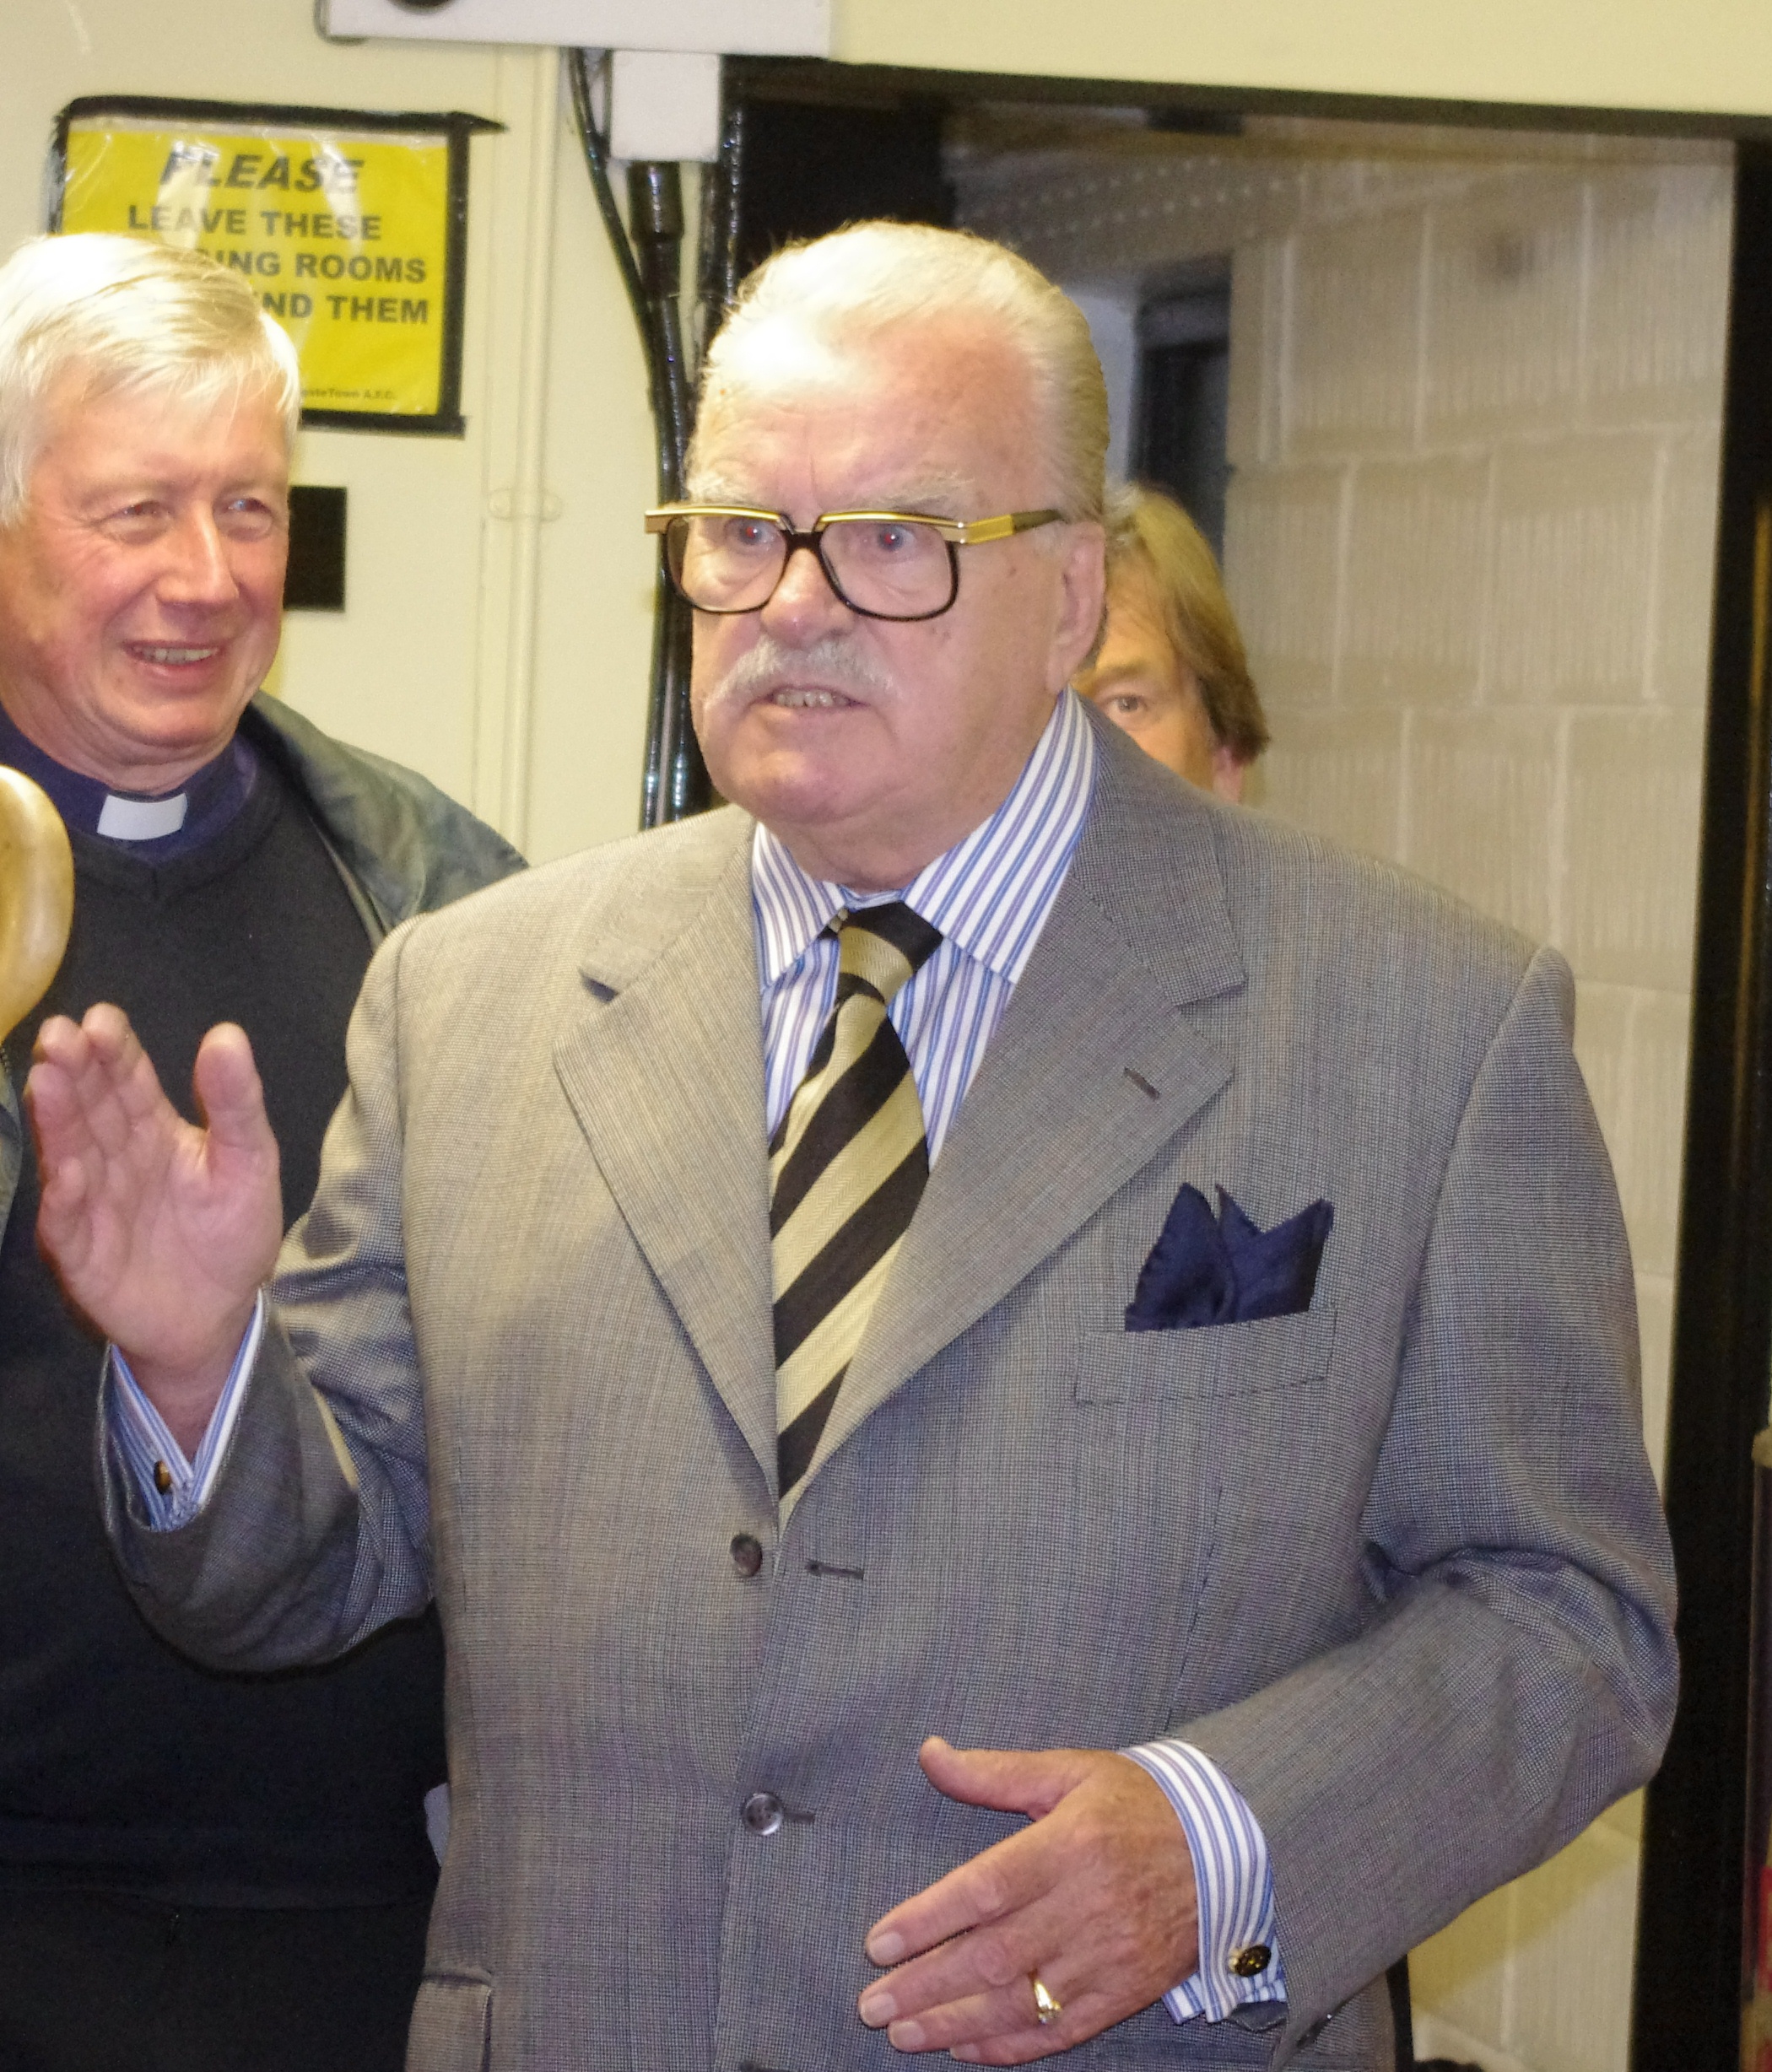 Former Leeds United chairman Bill Fotherby is the new director of football at Ossett Town